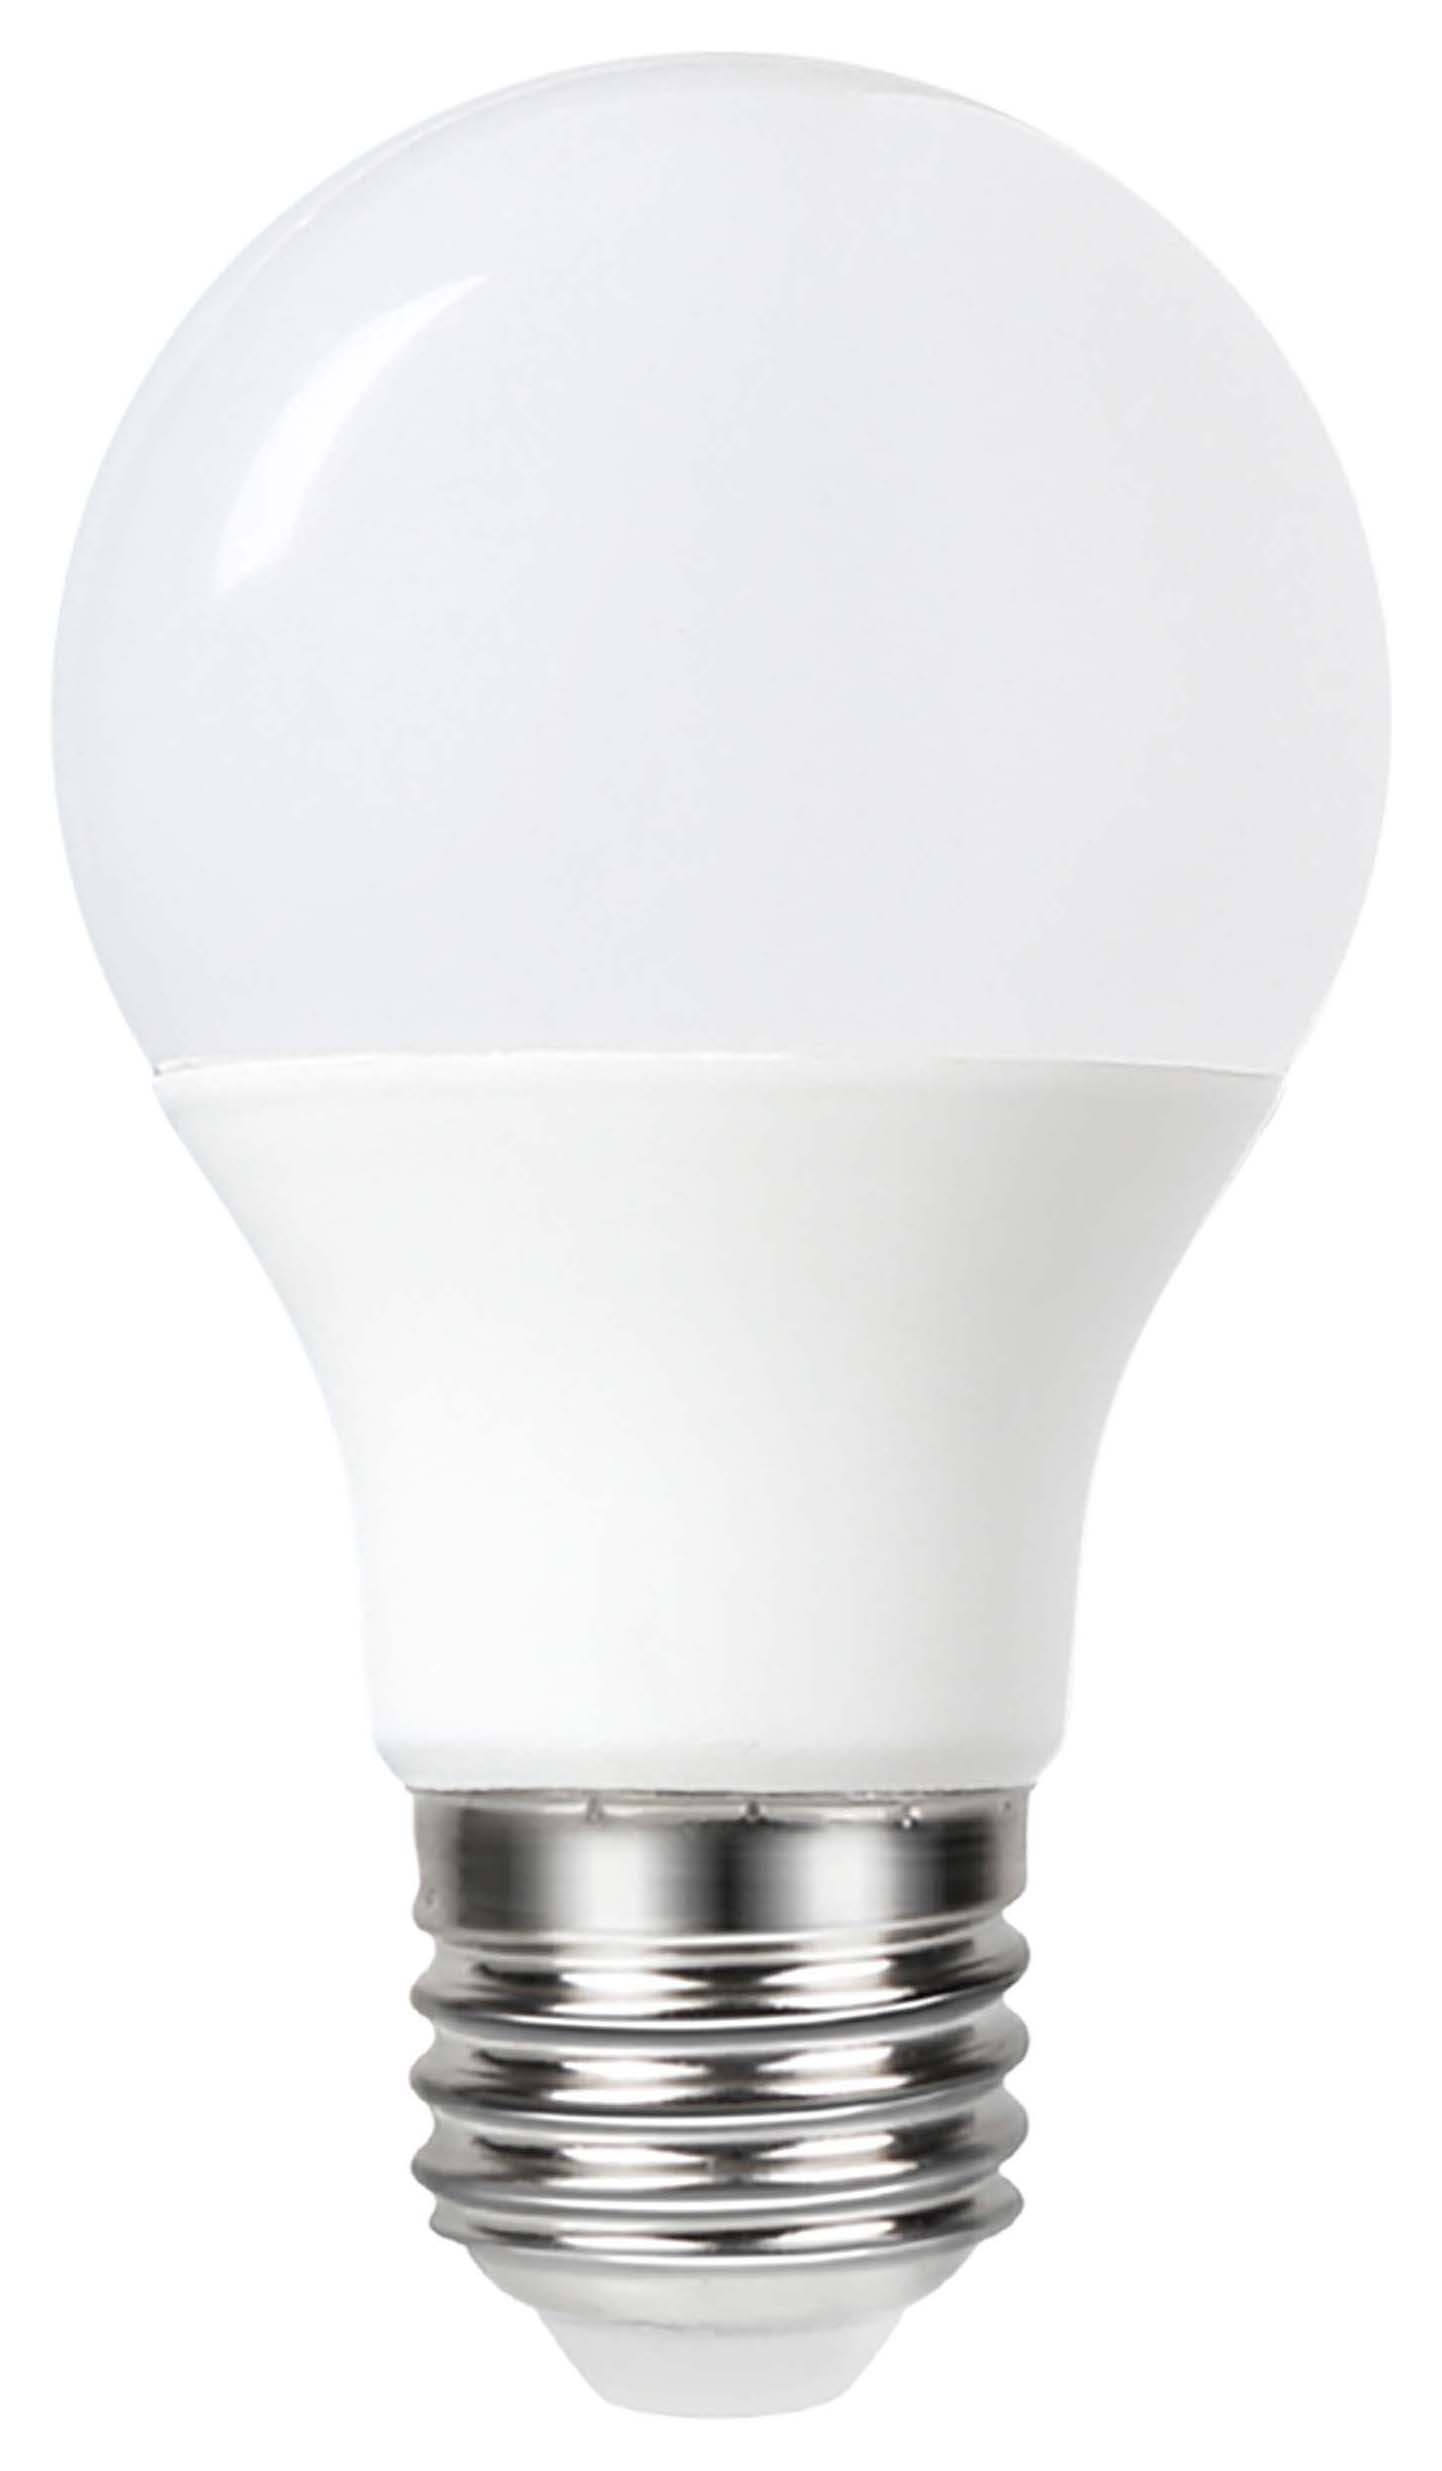 Image of Wickes Non-Dimmable GLS Opal LED E27 4.8W Warm White Light Bulb